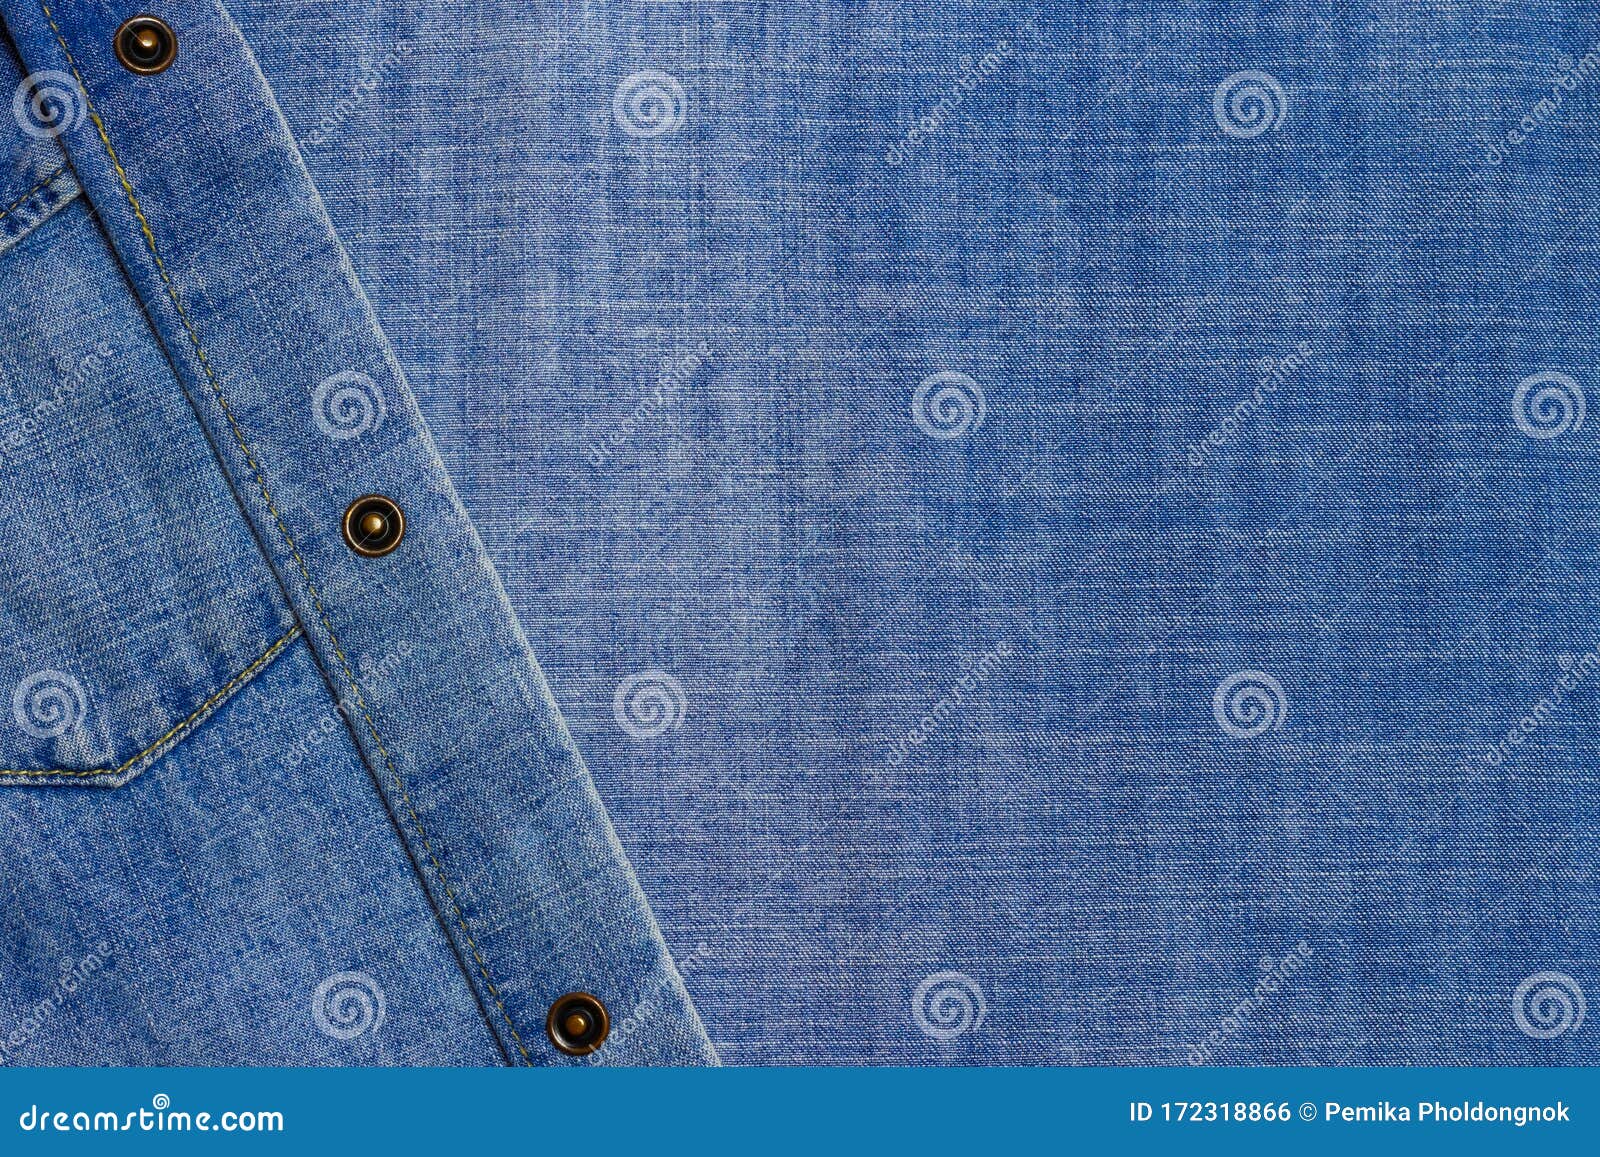 Fabric of Jeans Denim with Stud Texture Background Stock Photo - Image ...